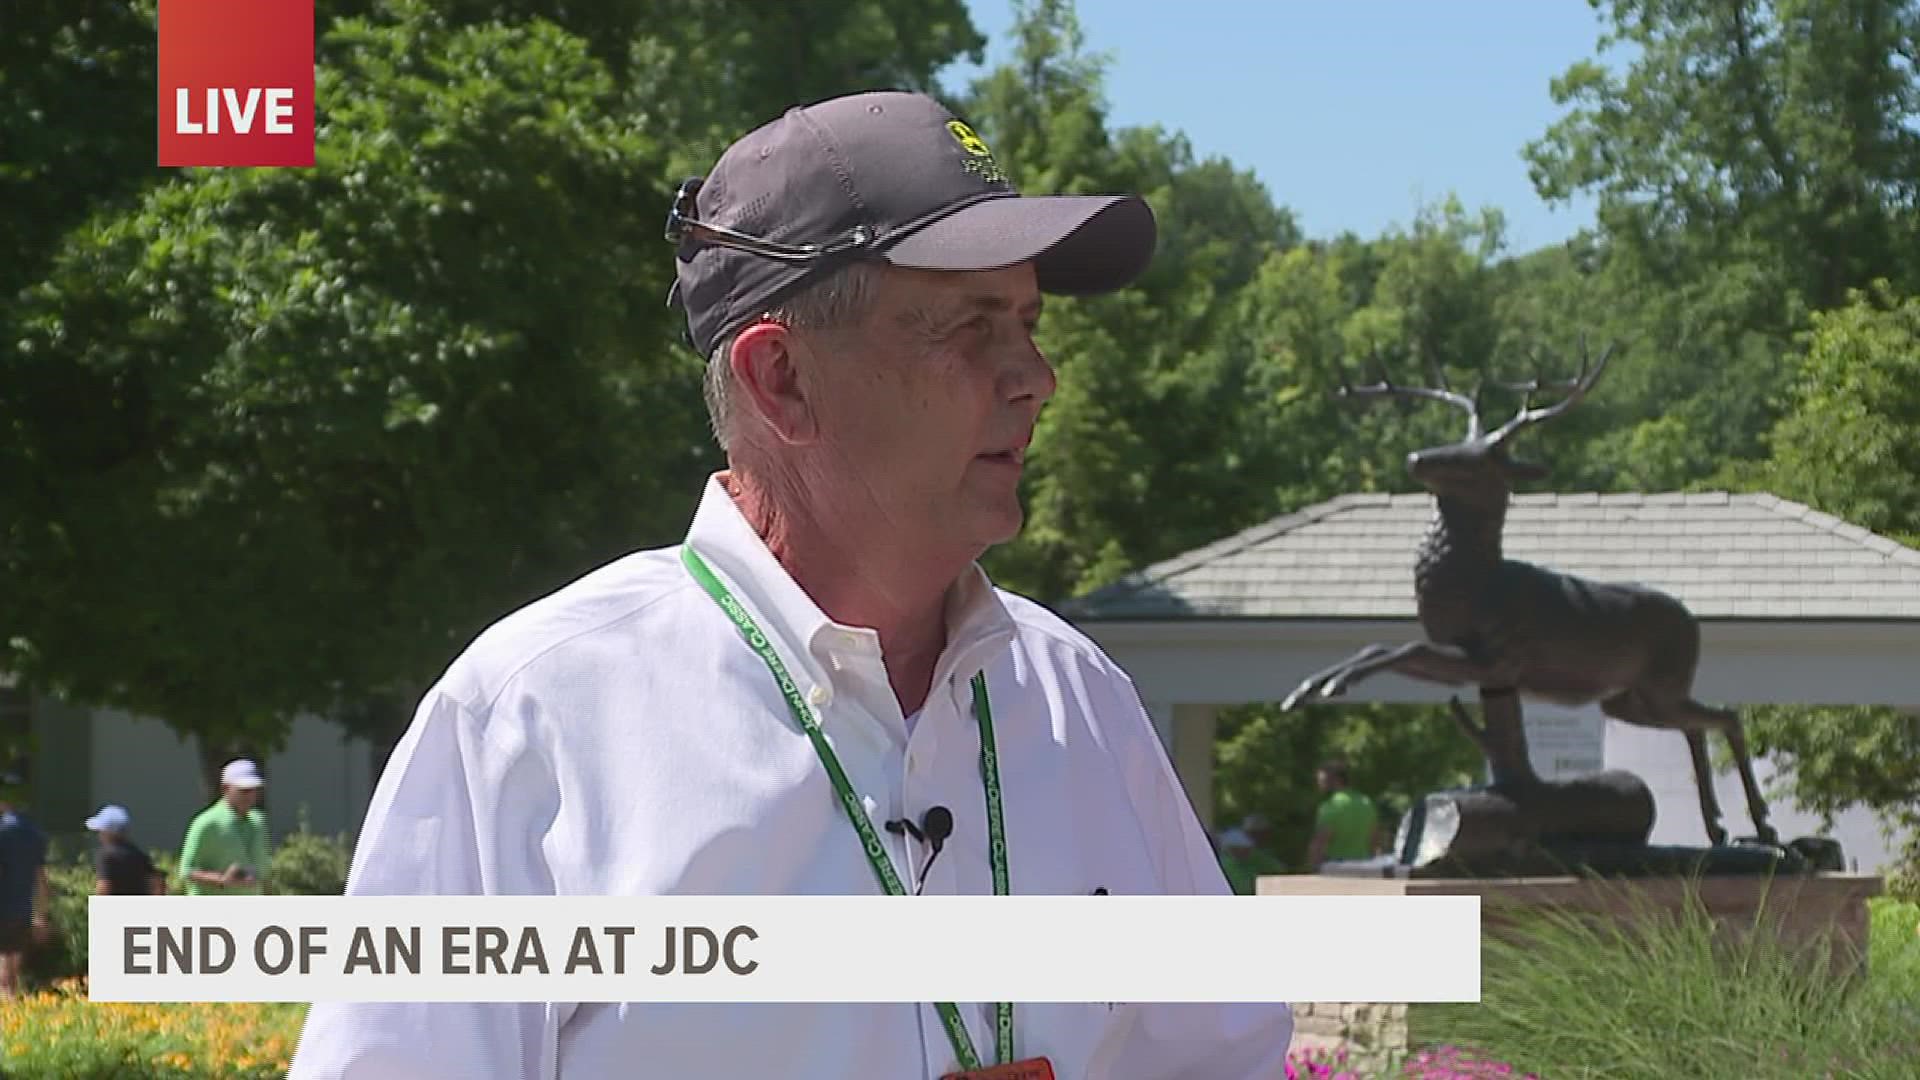 Clair Peterson was named tournament director for the John Deere Classic back in 2002. This will be his last year in the position.